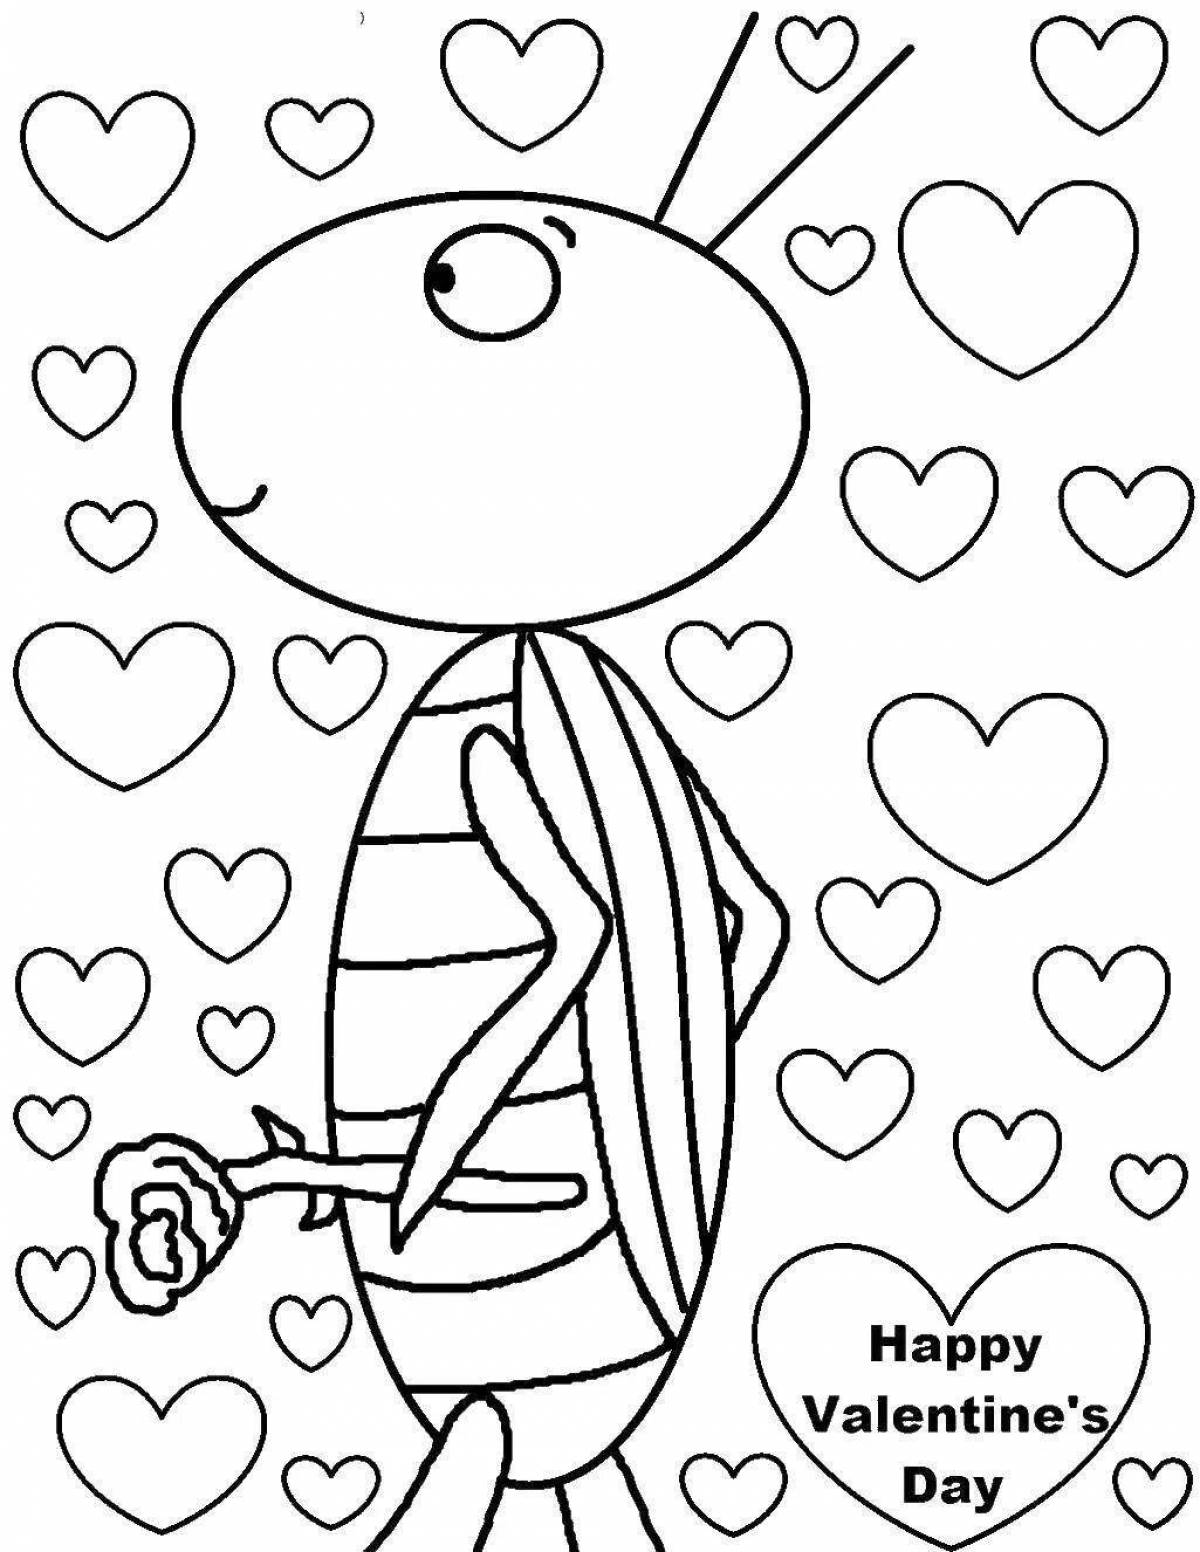 Comforting valentine's day coloring book